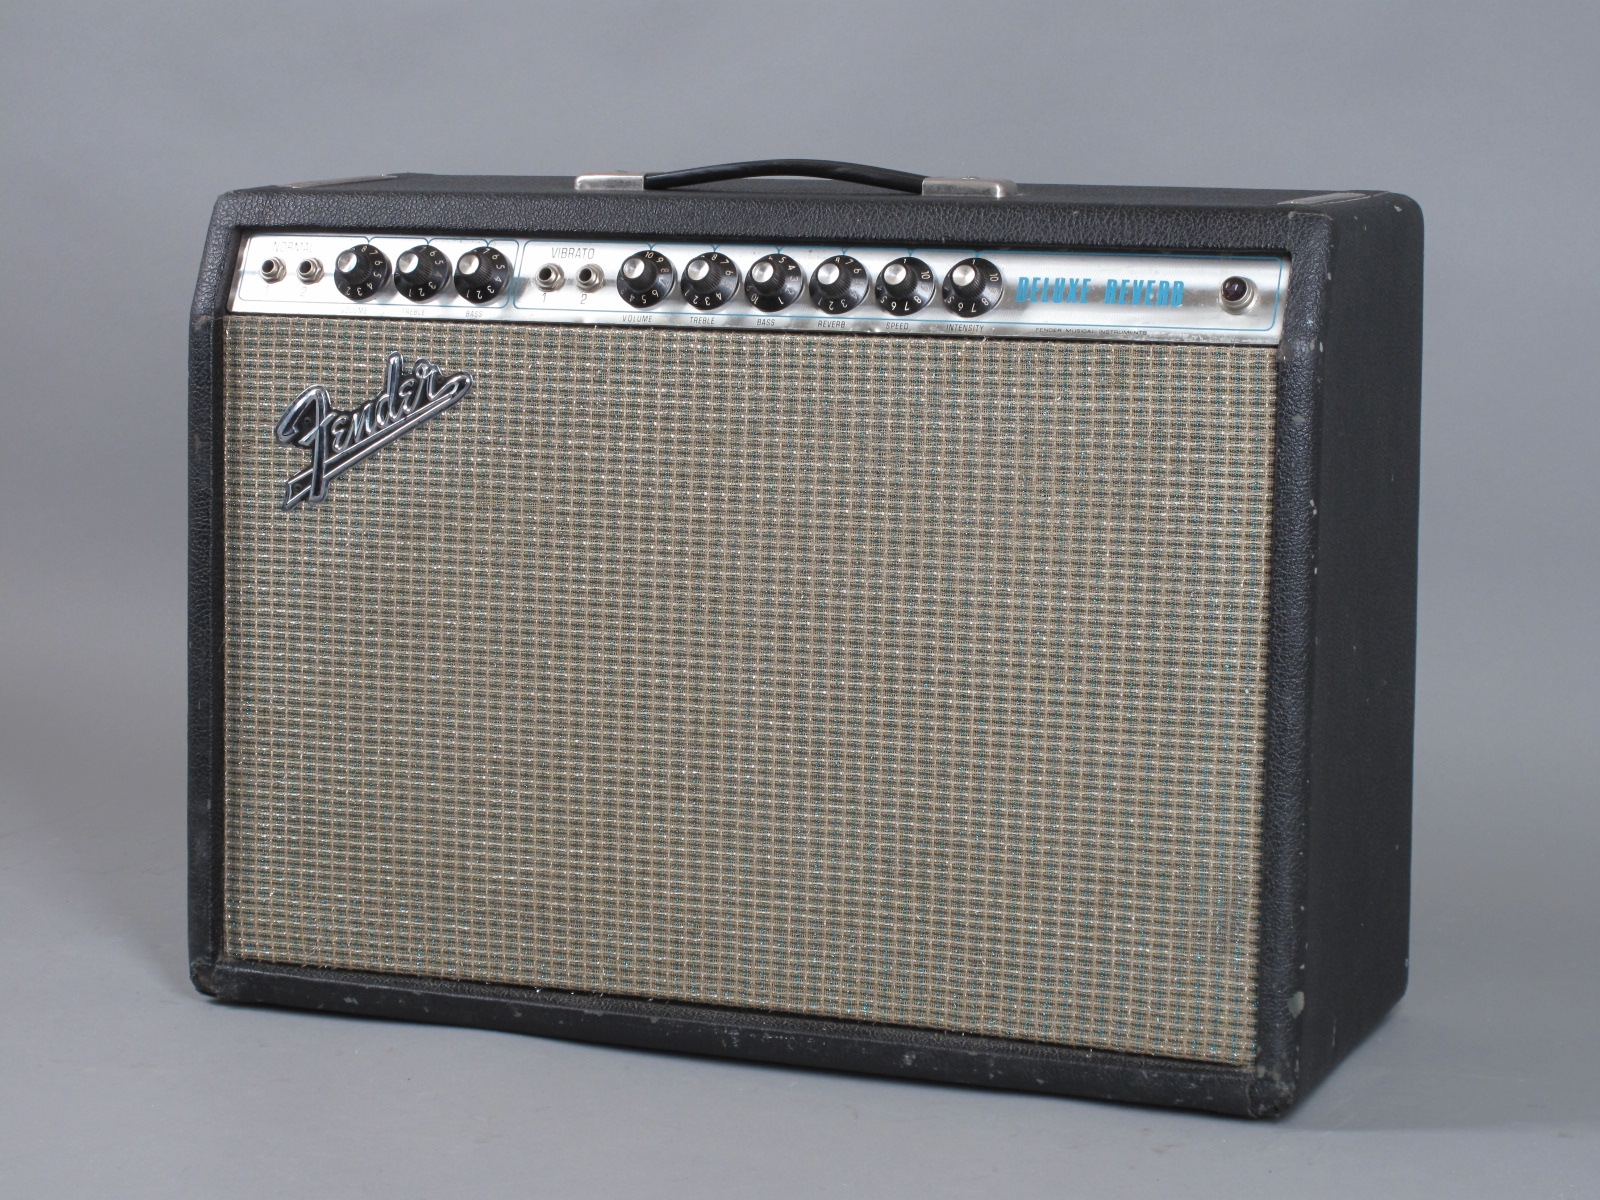 Fender Deluxe Reverb 1971 Silverface Amp For Sale GuitarPoint